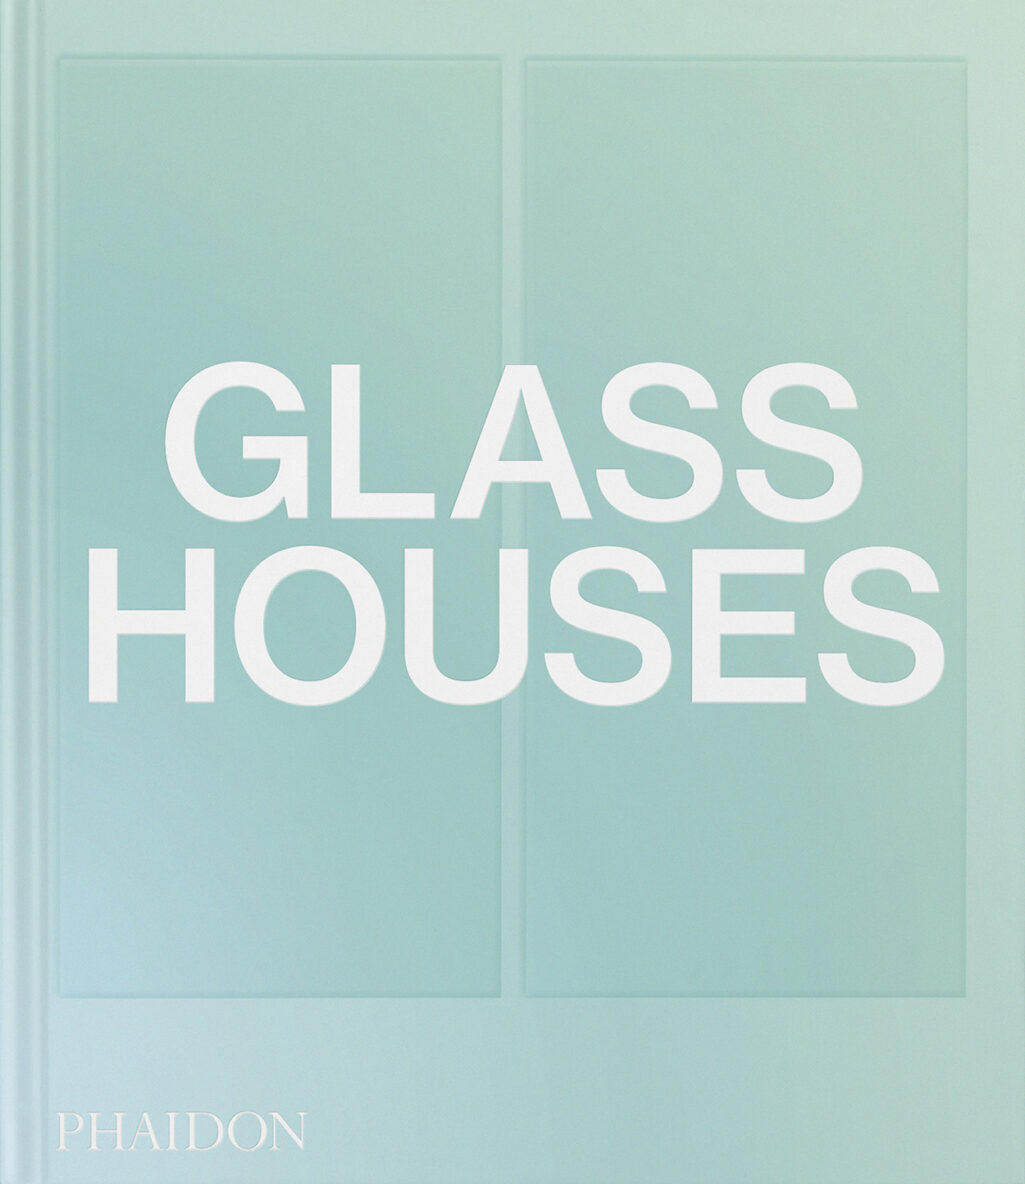 Glass Houses by Phaidon features 50 architect-designed houses